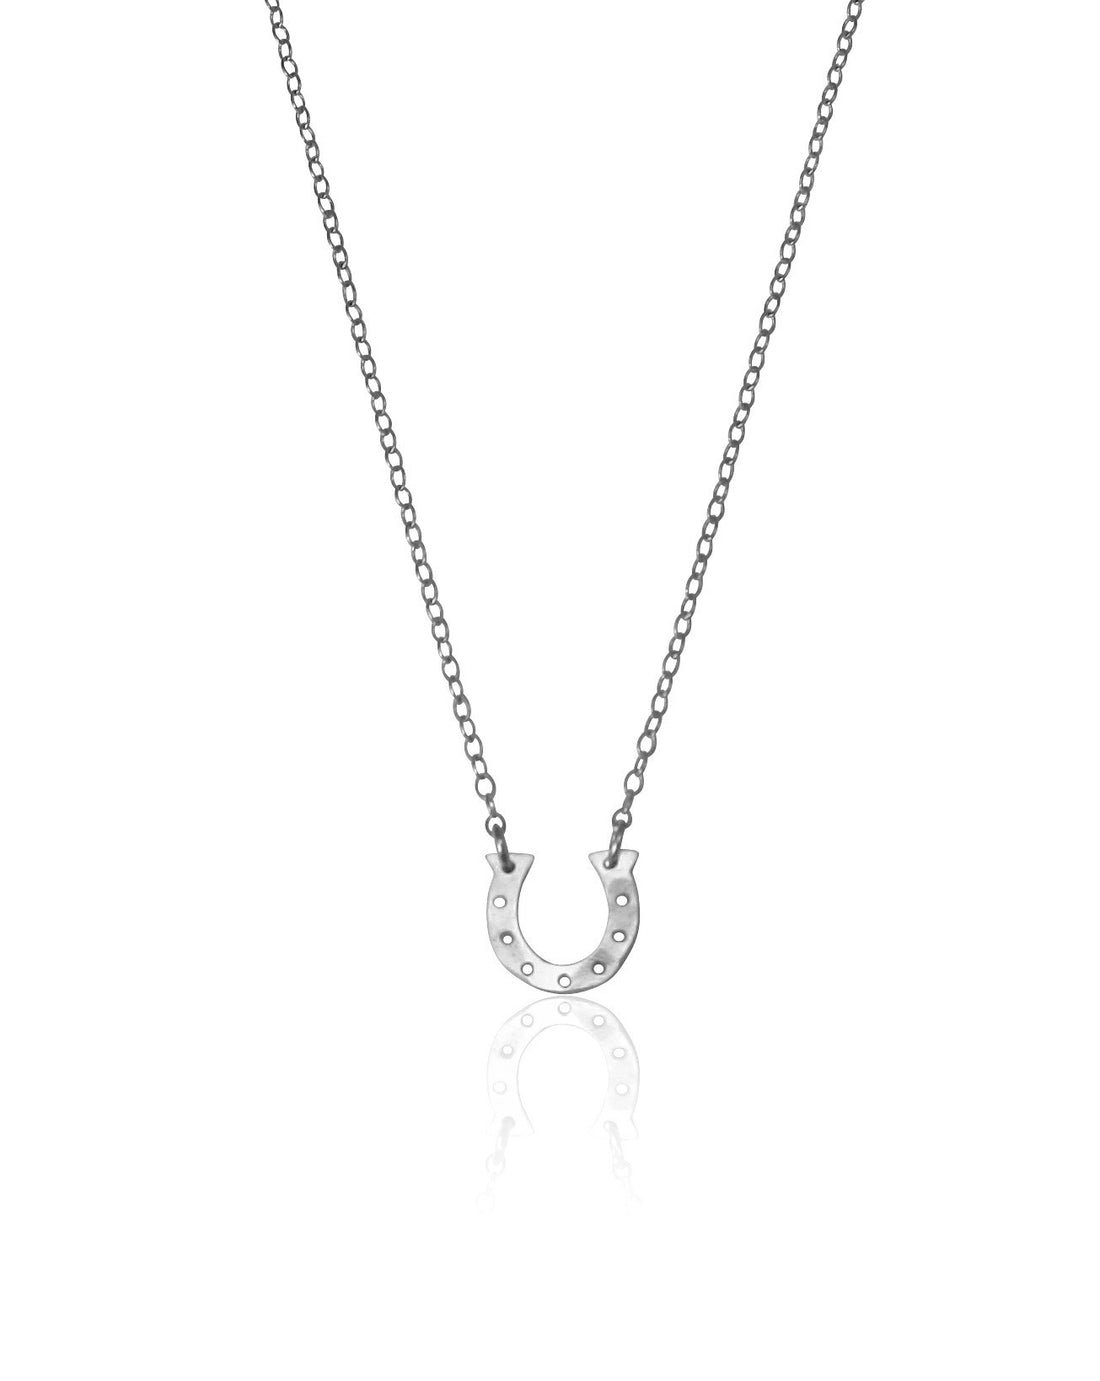 Lucky Horseshoe Necklace in Gold or Silver Online | Misuzi